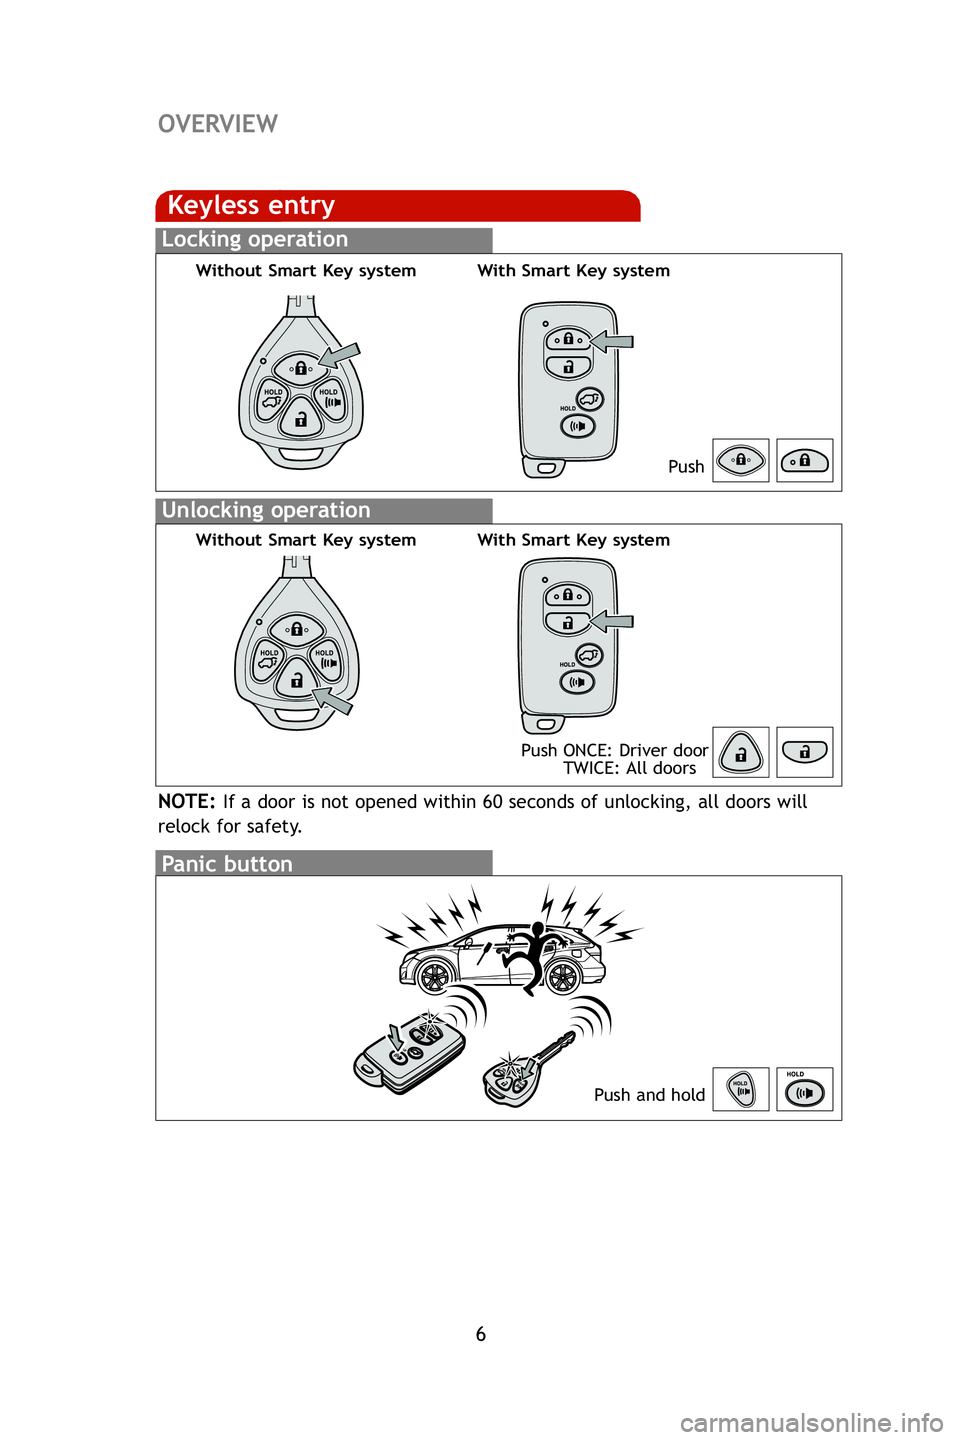 TOYOTA VENZA 2009  Owners Manual (in English) 6
OVERVIEW
Panic button
Push and hold
Keyless entry
Locking operation
Unlocking operation
NOTE:If a door is not opened within 60 seconds of unlocking, all doors will
relock for safety.
Push ONCE: Driv